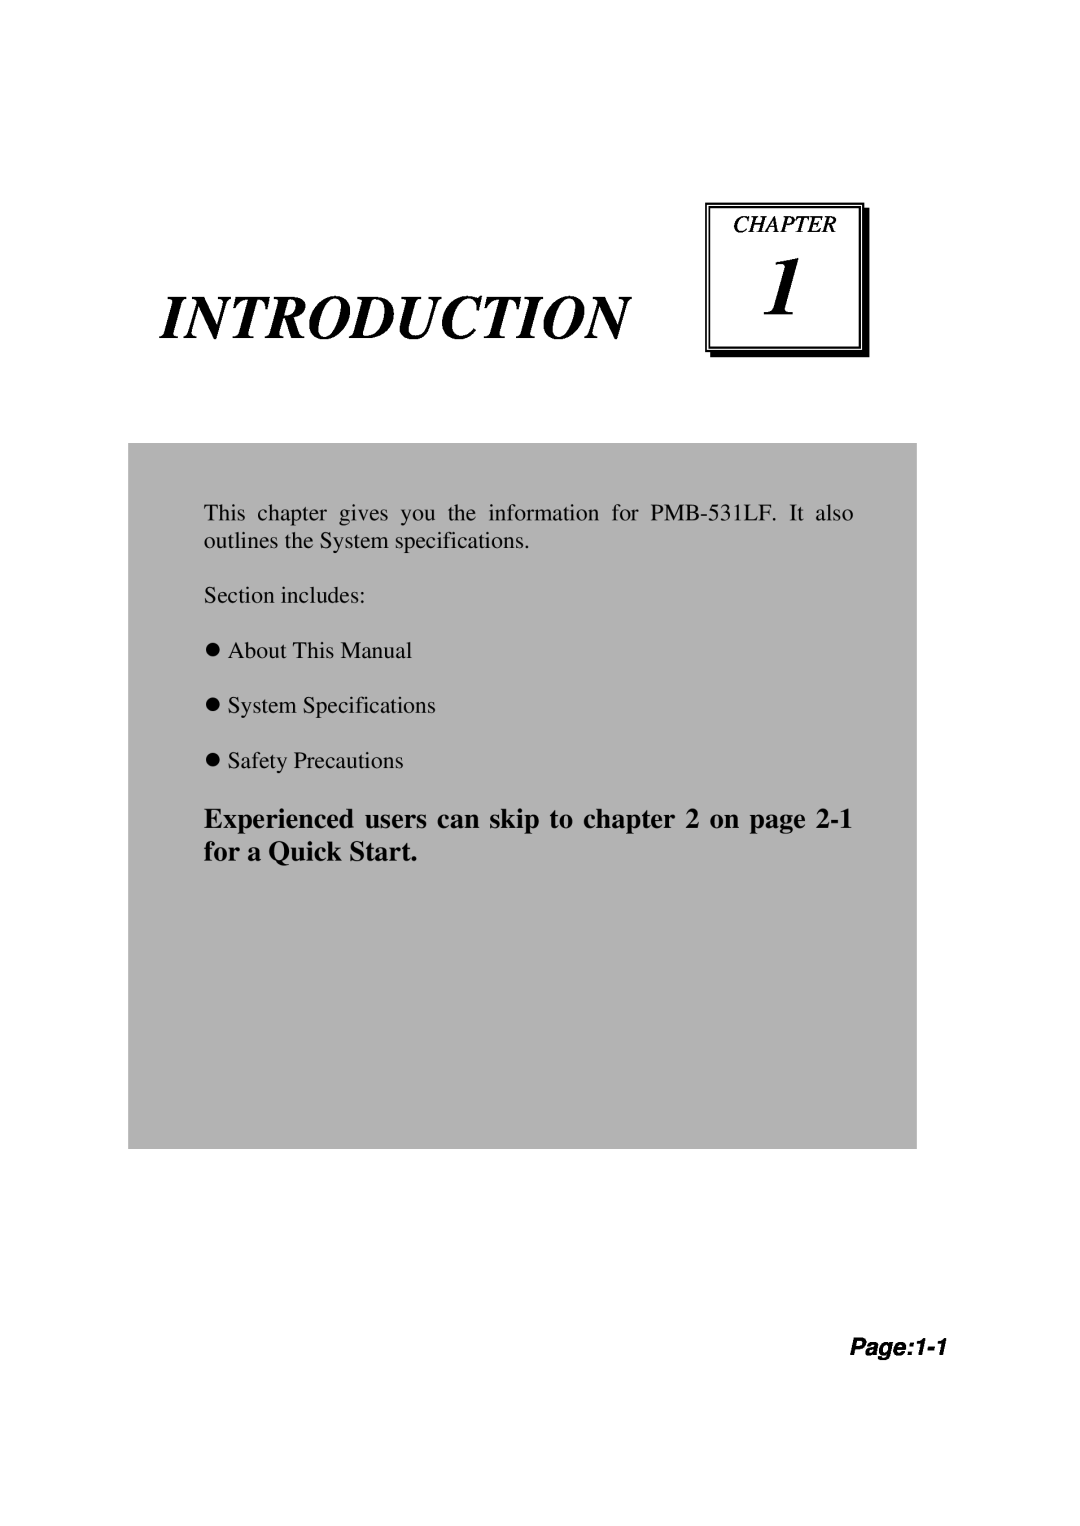 Intel PMB-531LF user manual Introduction, Chapter, Page 